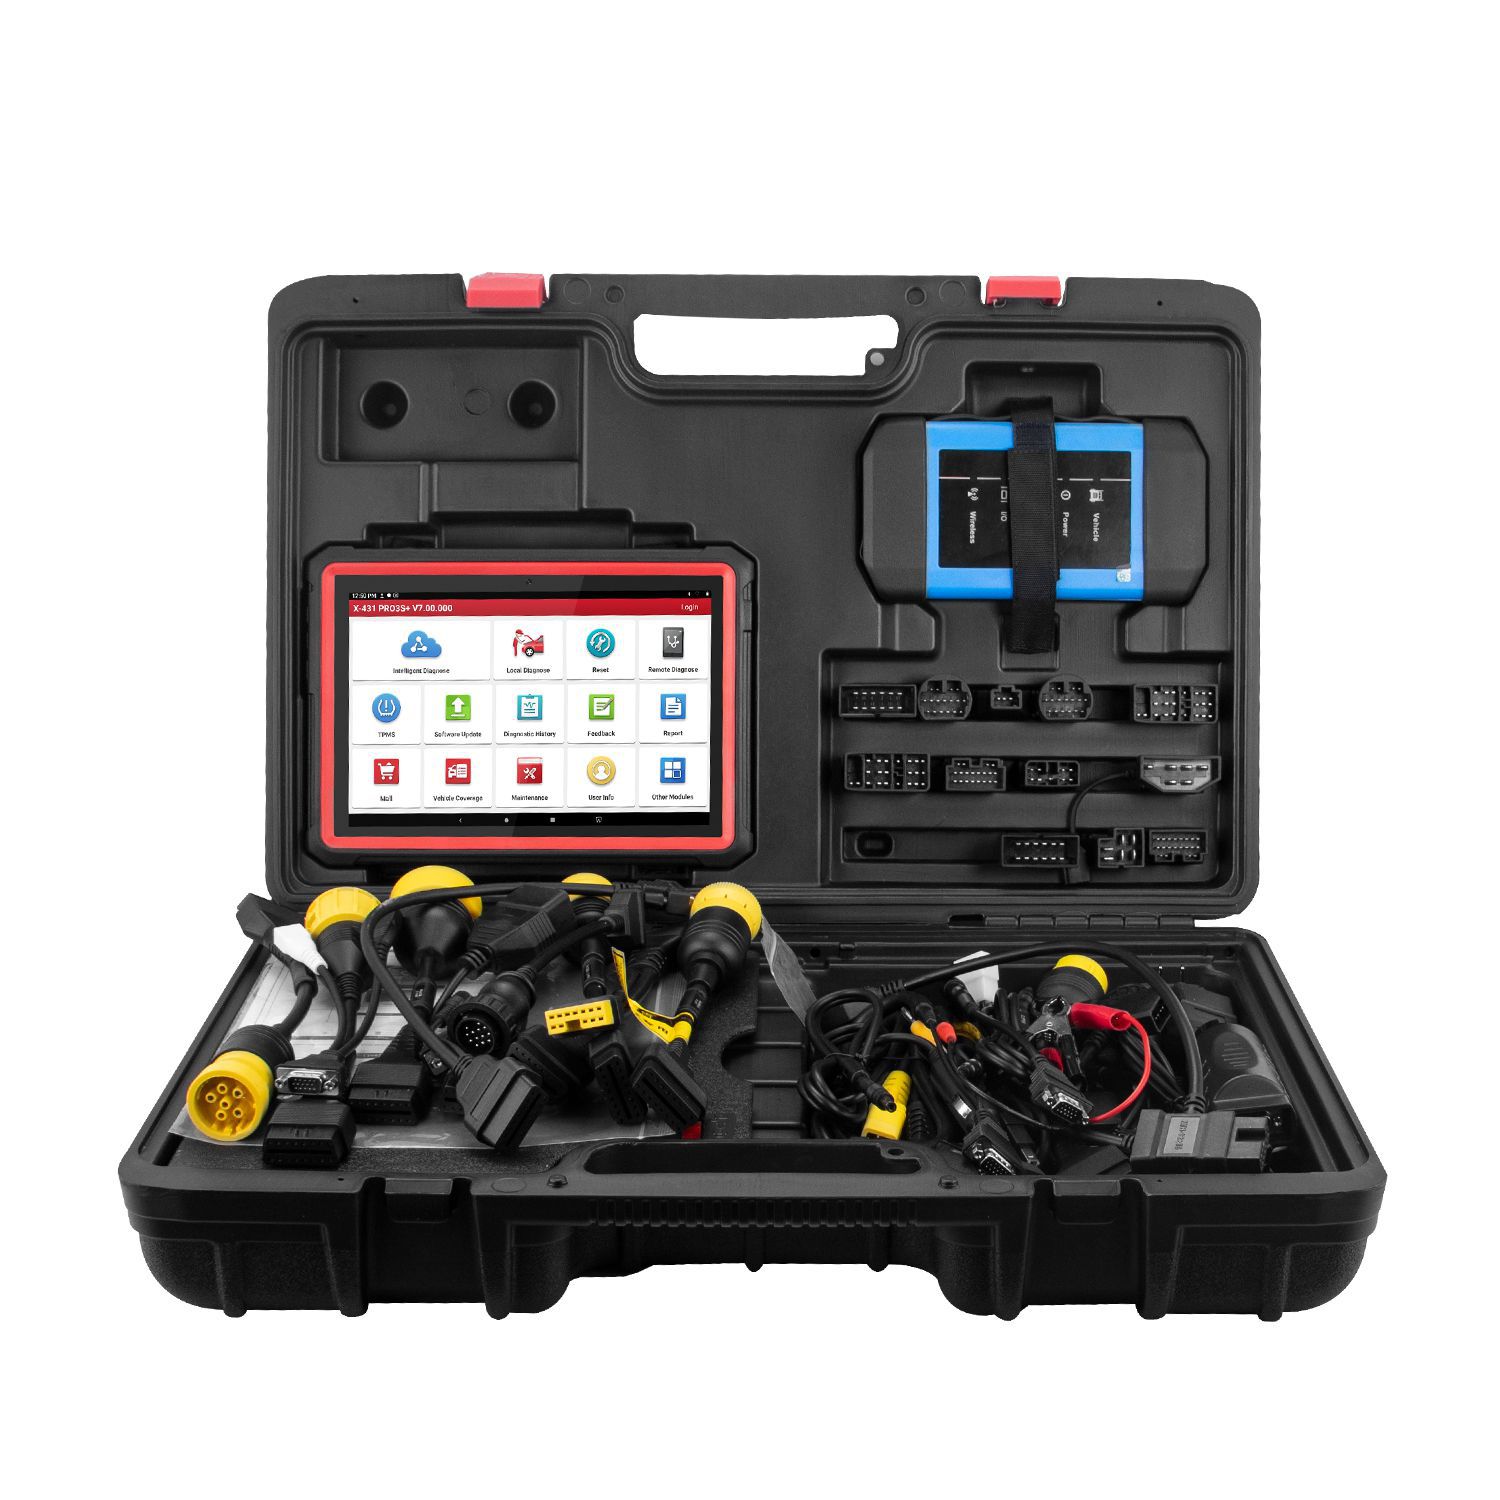 LAUNCH X431 PRO3S+ V2.0 HDIII 12V Car/24V Truck/Heavy Duty 2 in 1 Diagnostic Tool OBDII Code Reader Auto Scanner X-431 PRO3S HD3